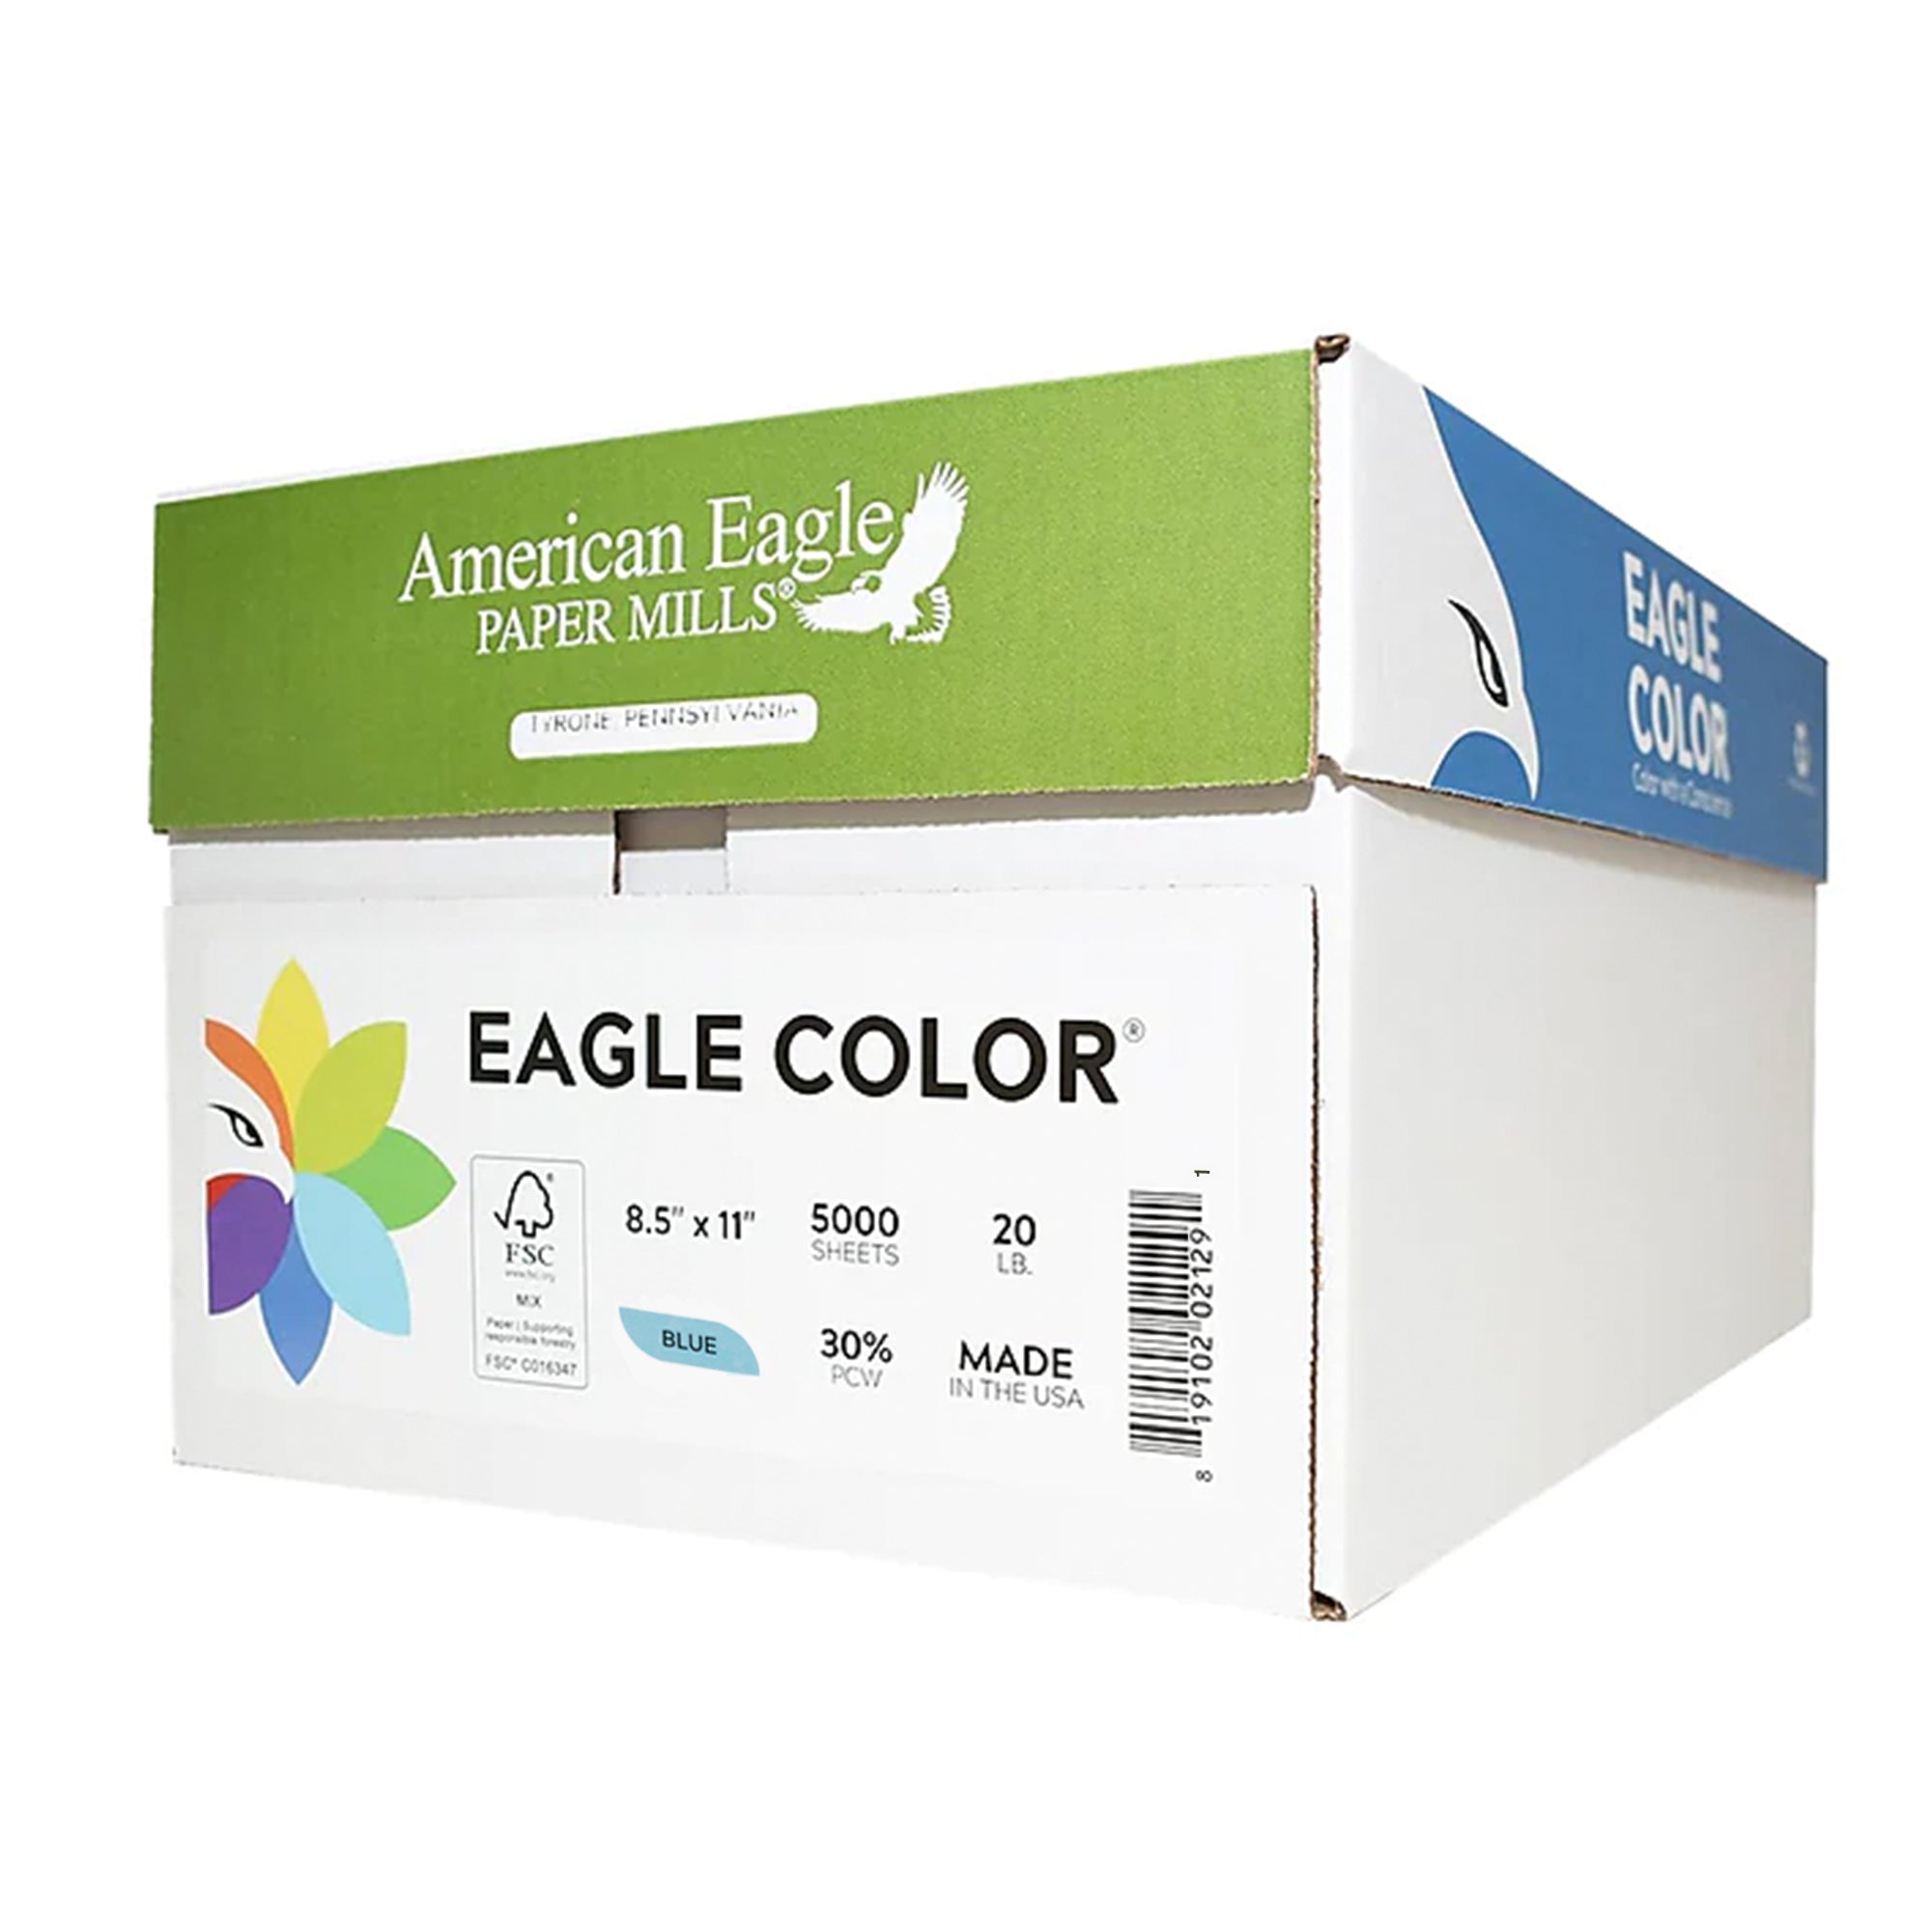 Eagle Color (30% PCW) 8.5 x 11 Blue Colored Copy Paper (500 Sheets/Ream) 10 Reams (Local Pick Up Only)